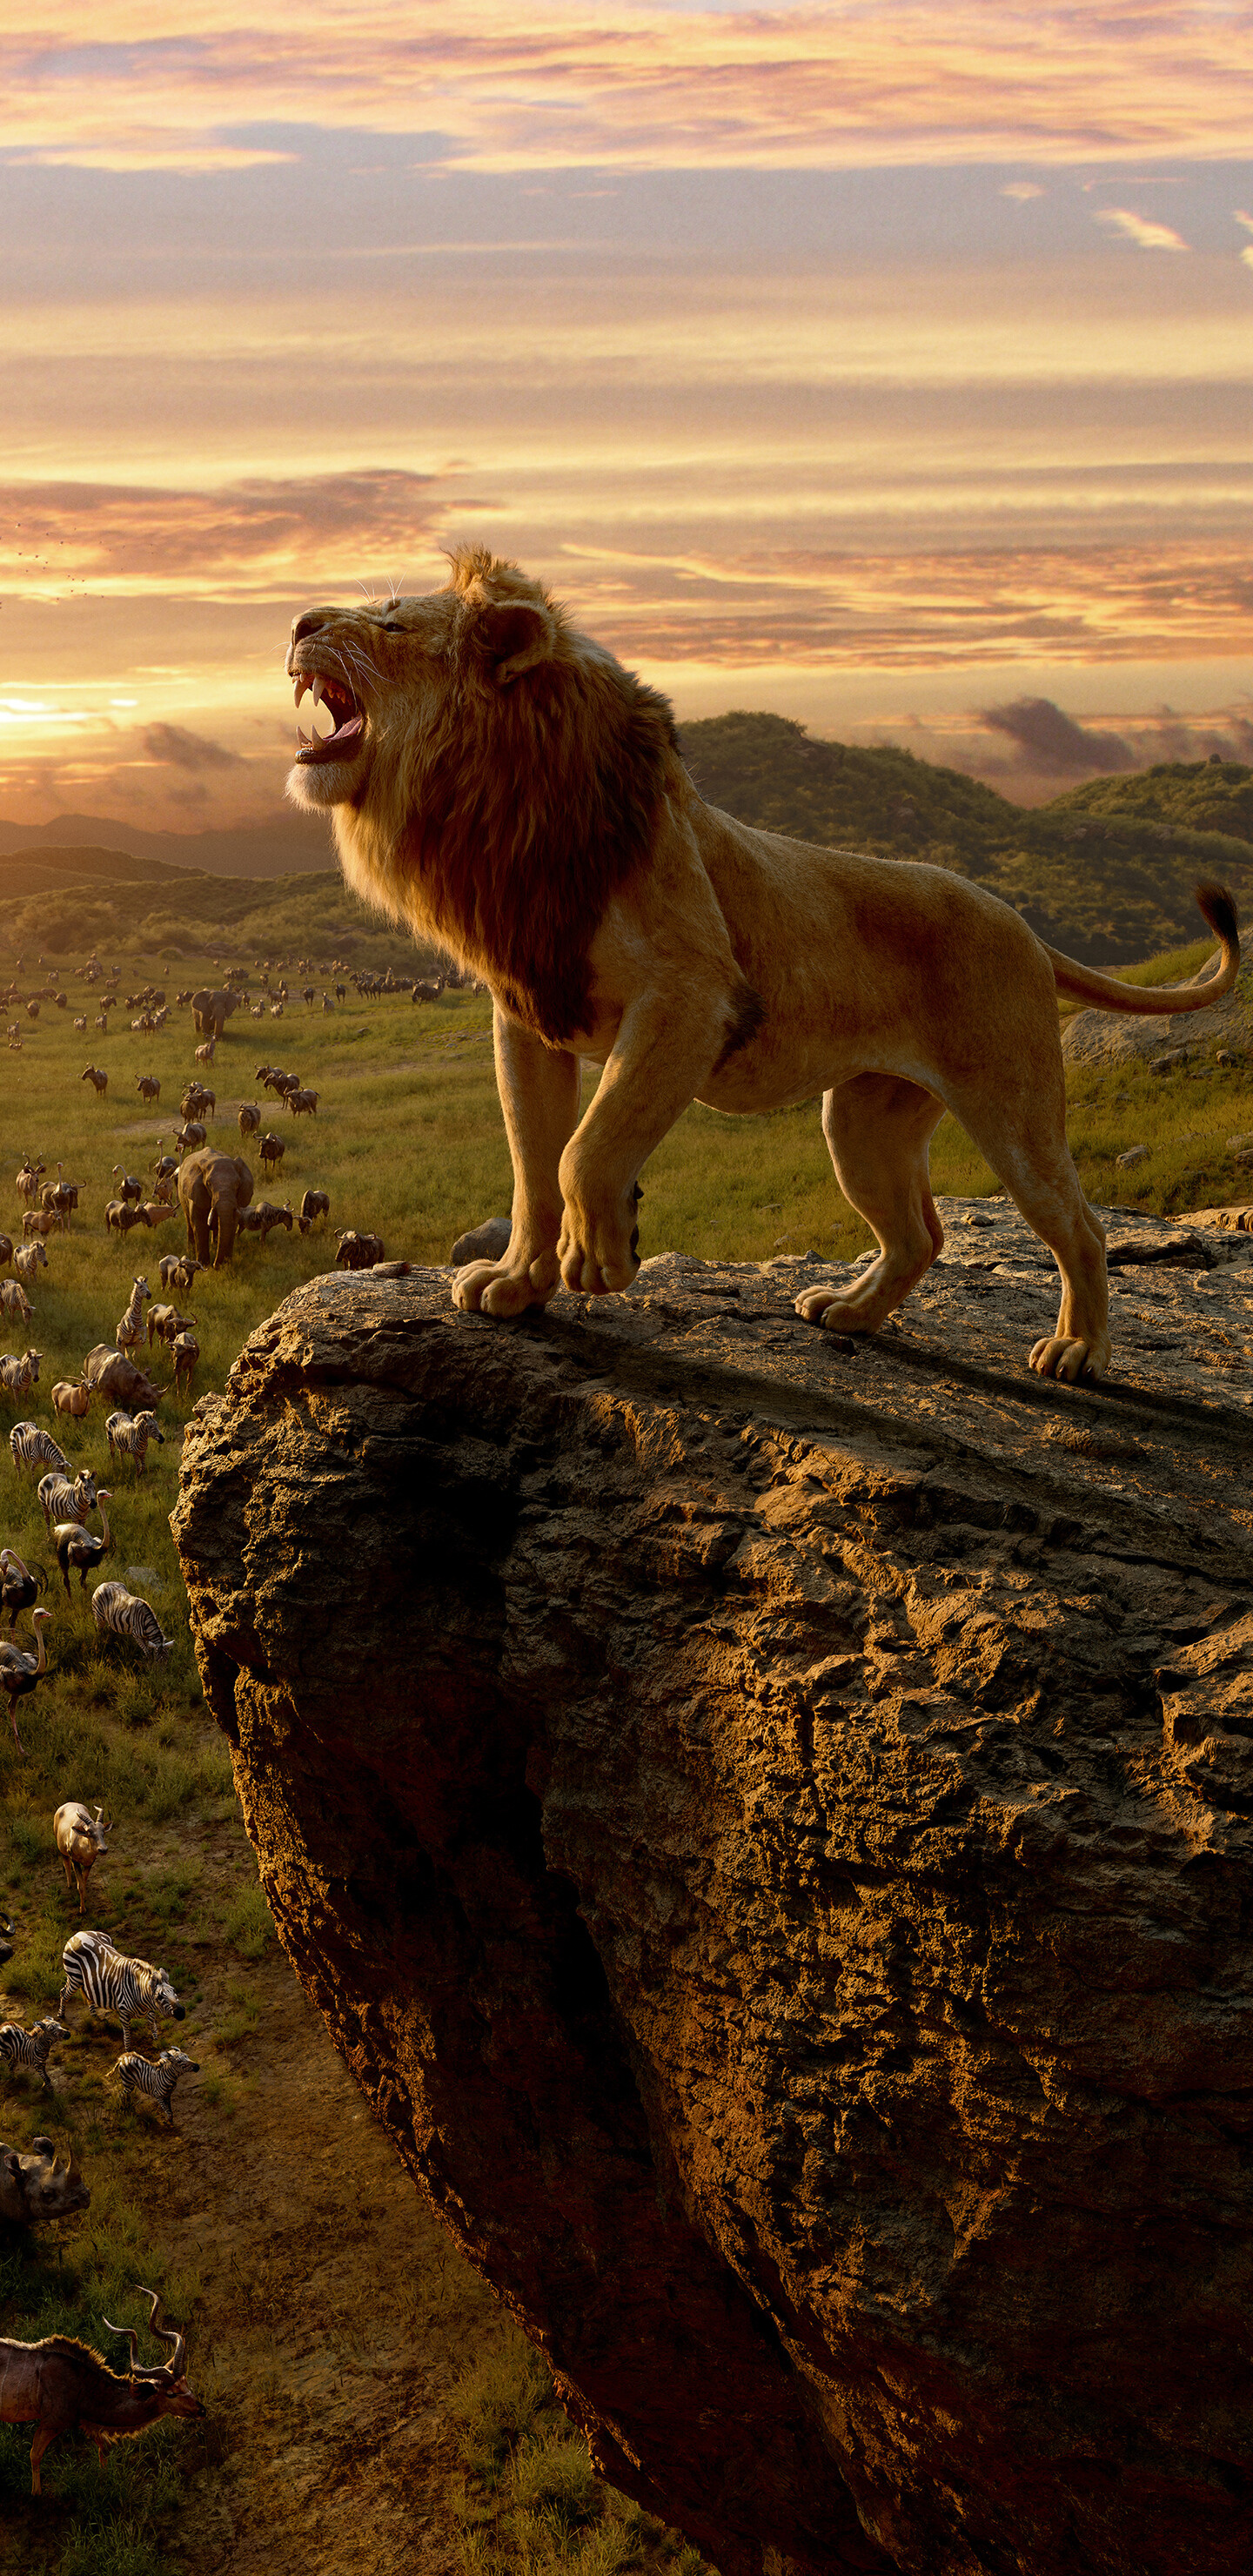 The Lion King: Disney's film journeys to the African savanna where a future king is born. 1440x2960 HD Wallpaper.